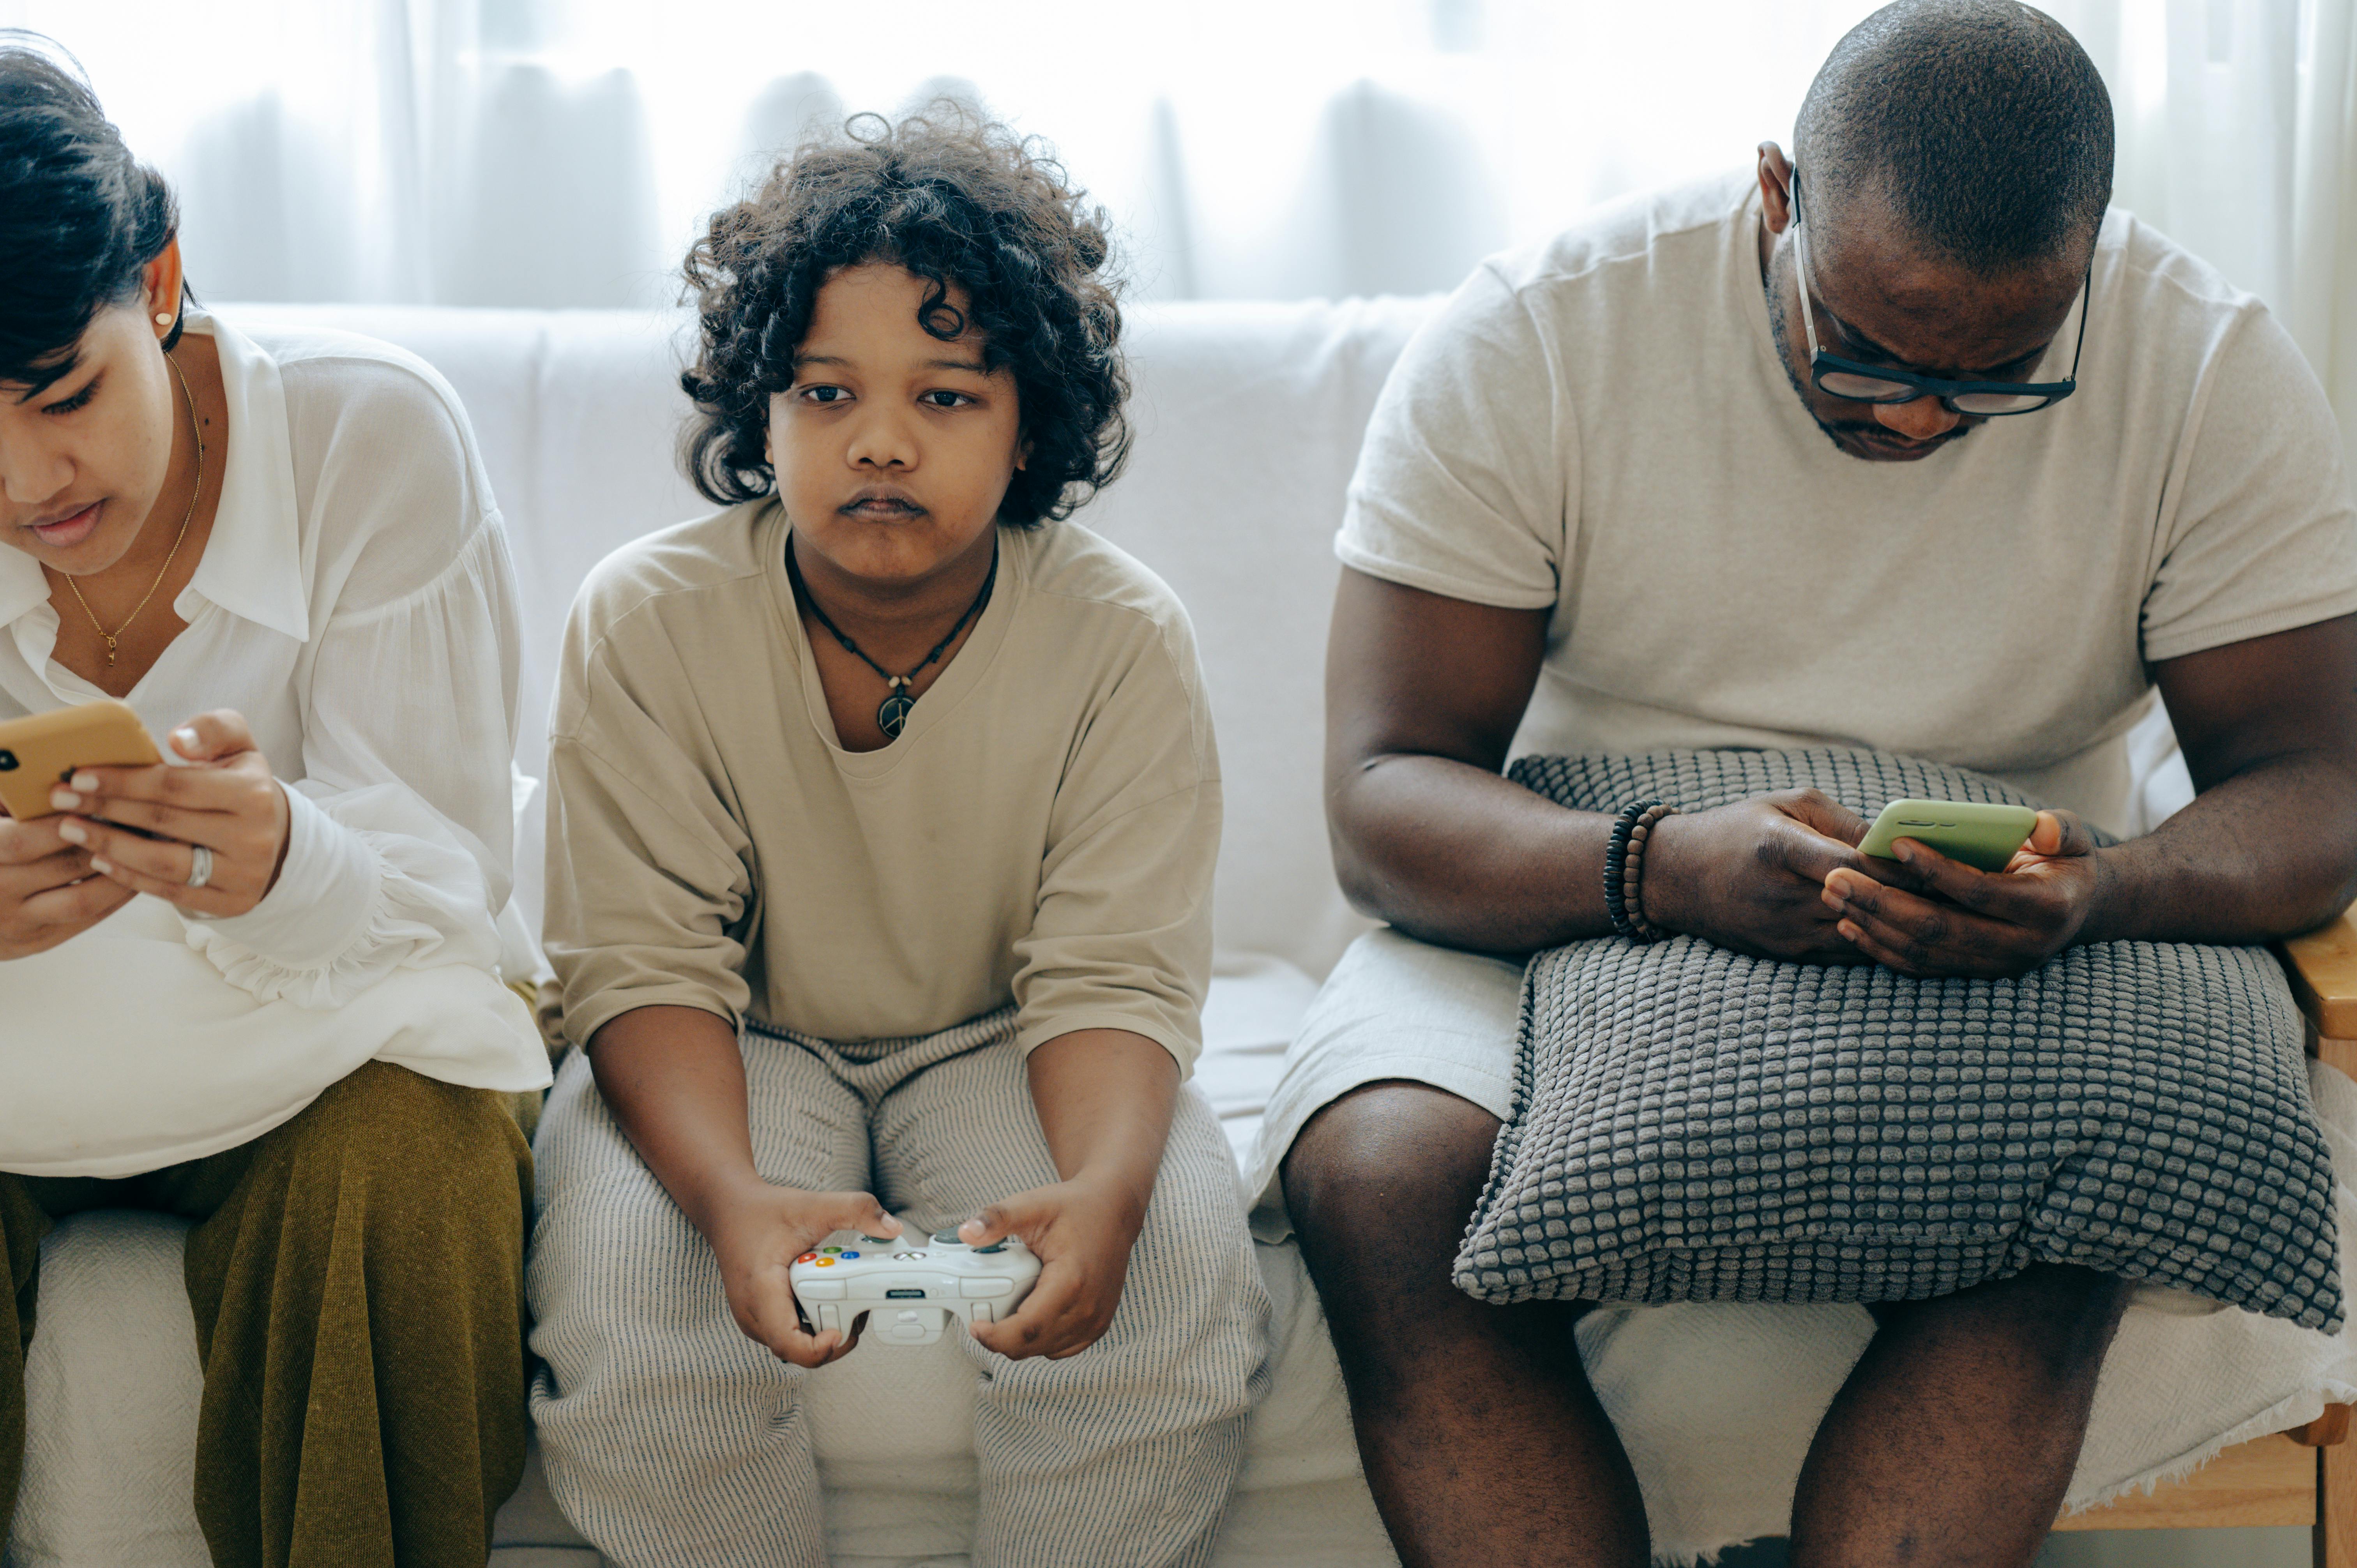 multiethnic family spending time together on couch with gadgets